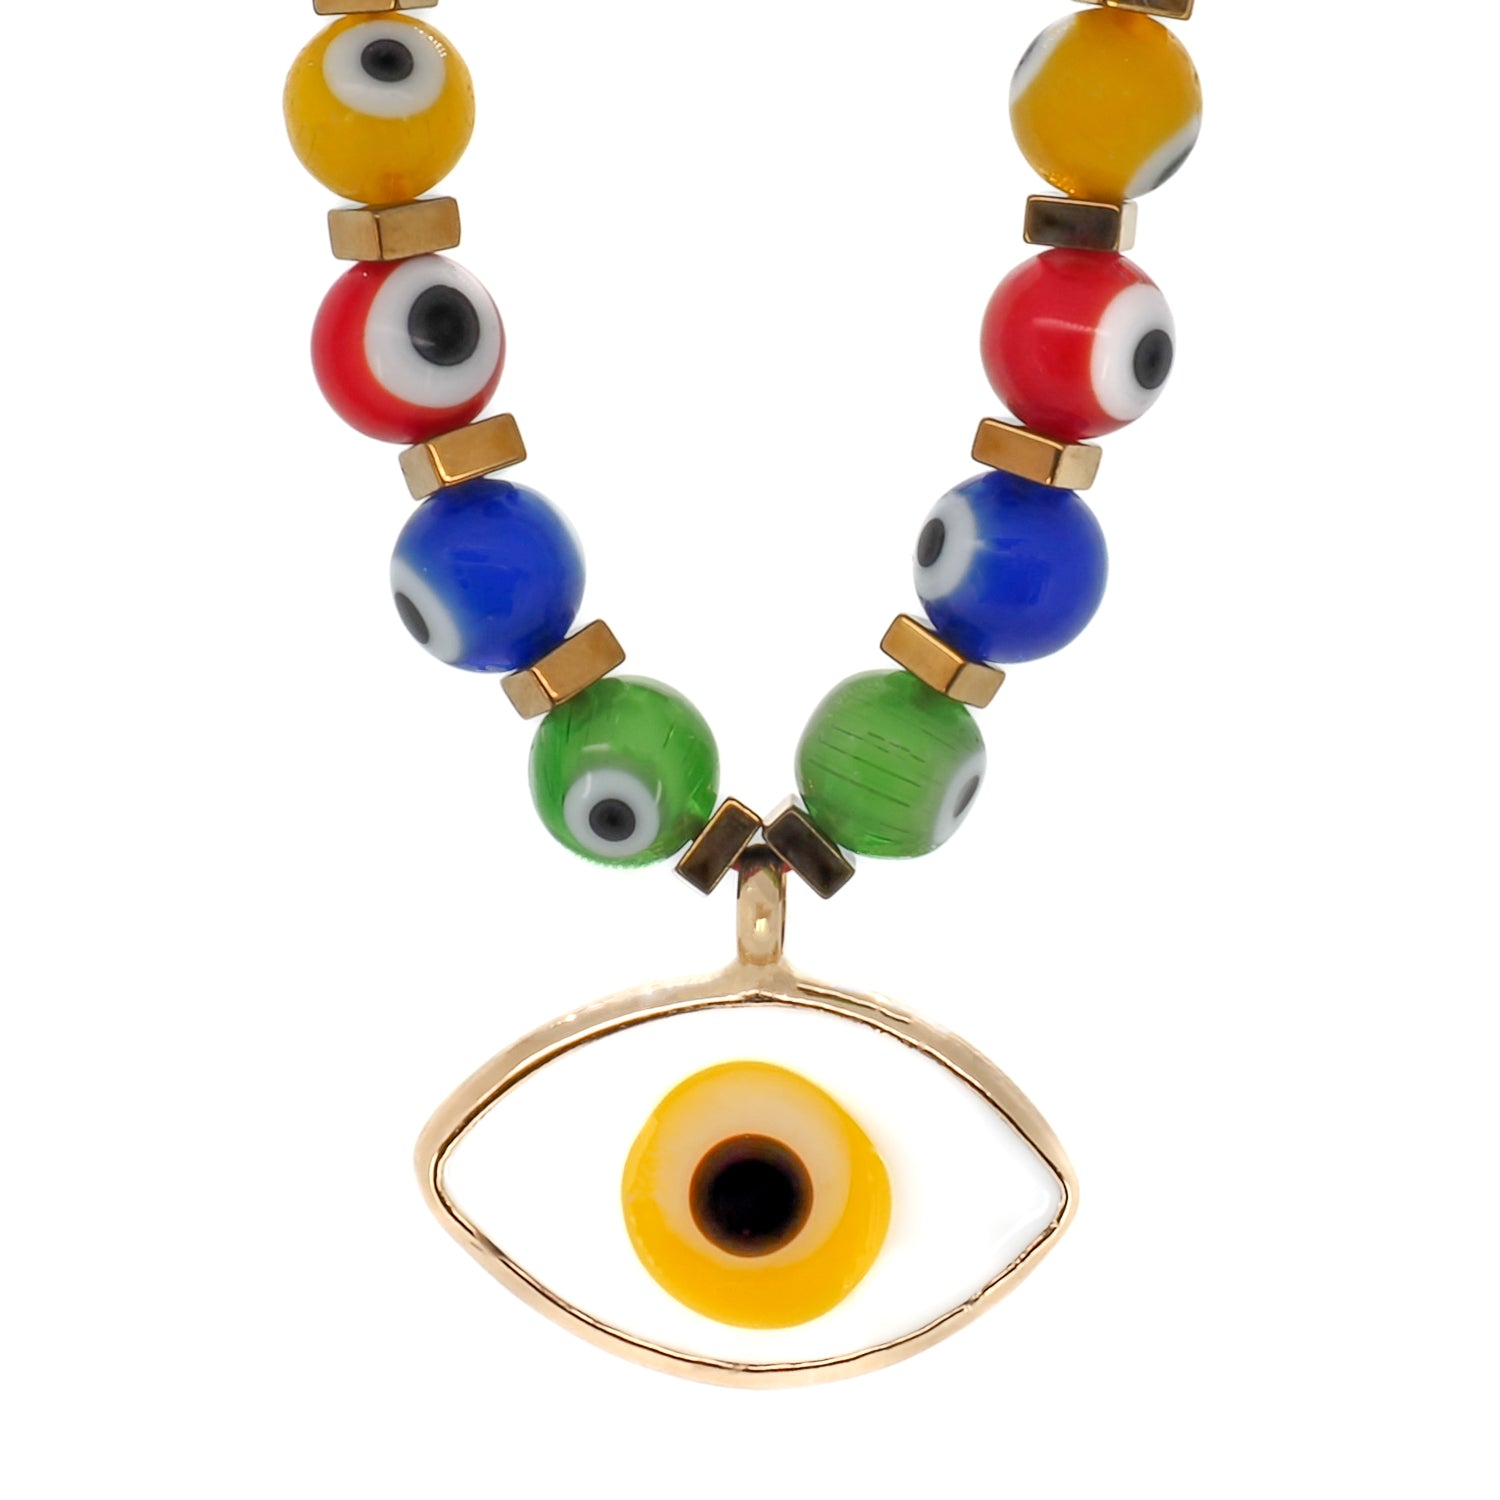 Vibrant Evil Eye Pendant Necklace - A captivating display of the Evil Eye Beaded Necklace, highlighting the vibrant colors of the glass evil eye beads and the gold hematite stone accents. This necklace is a unique blend of protection and spirituality, perfect for adding a pop of color to any outfit.